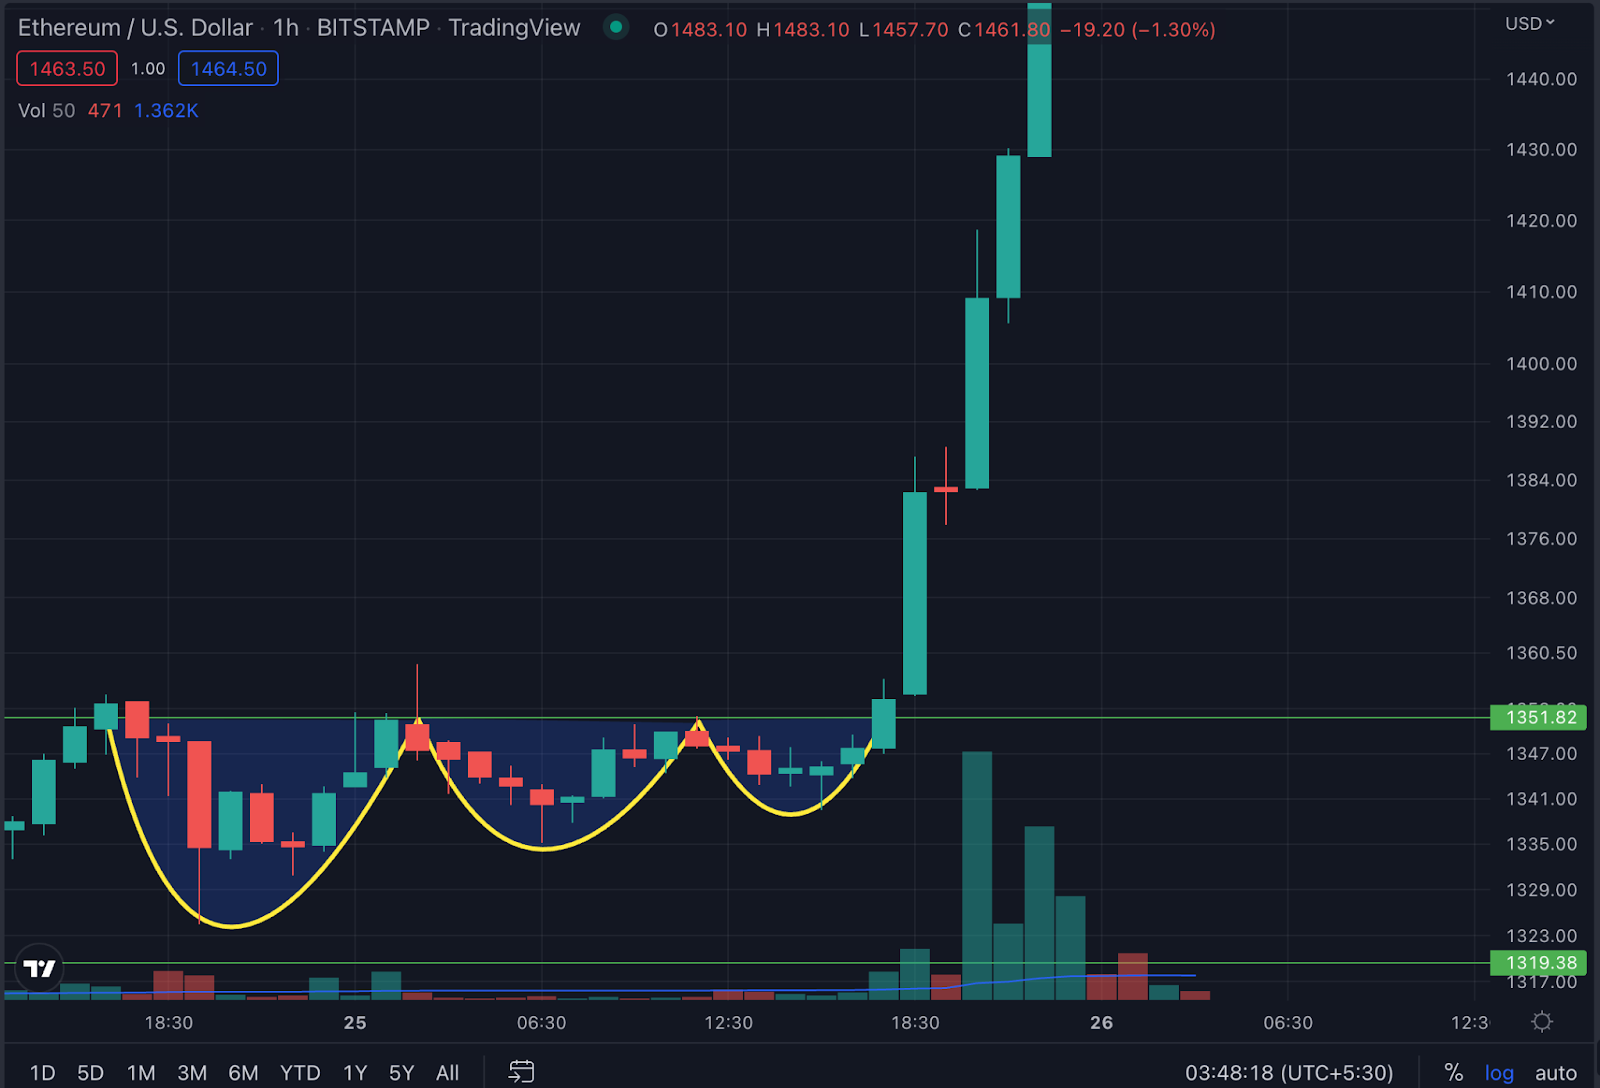 Bitcoin (BTC) surged nearly 5% and ETH surged nearly 10% over the past 24 hours, resulting in the liquidation of $800 million worth of shorts.